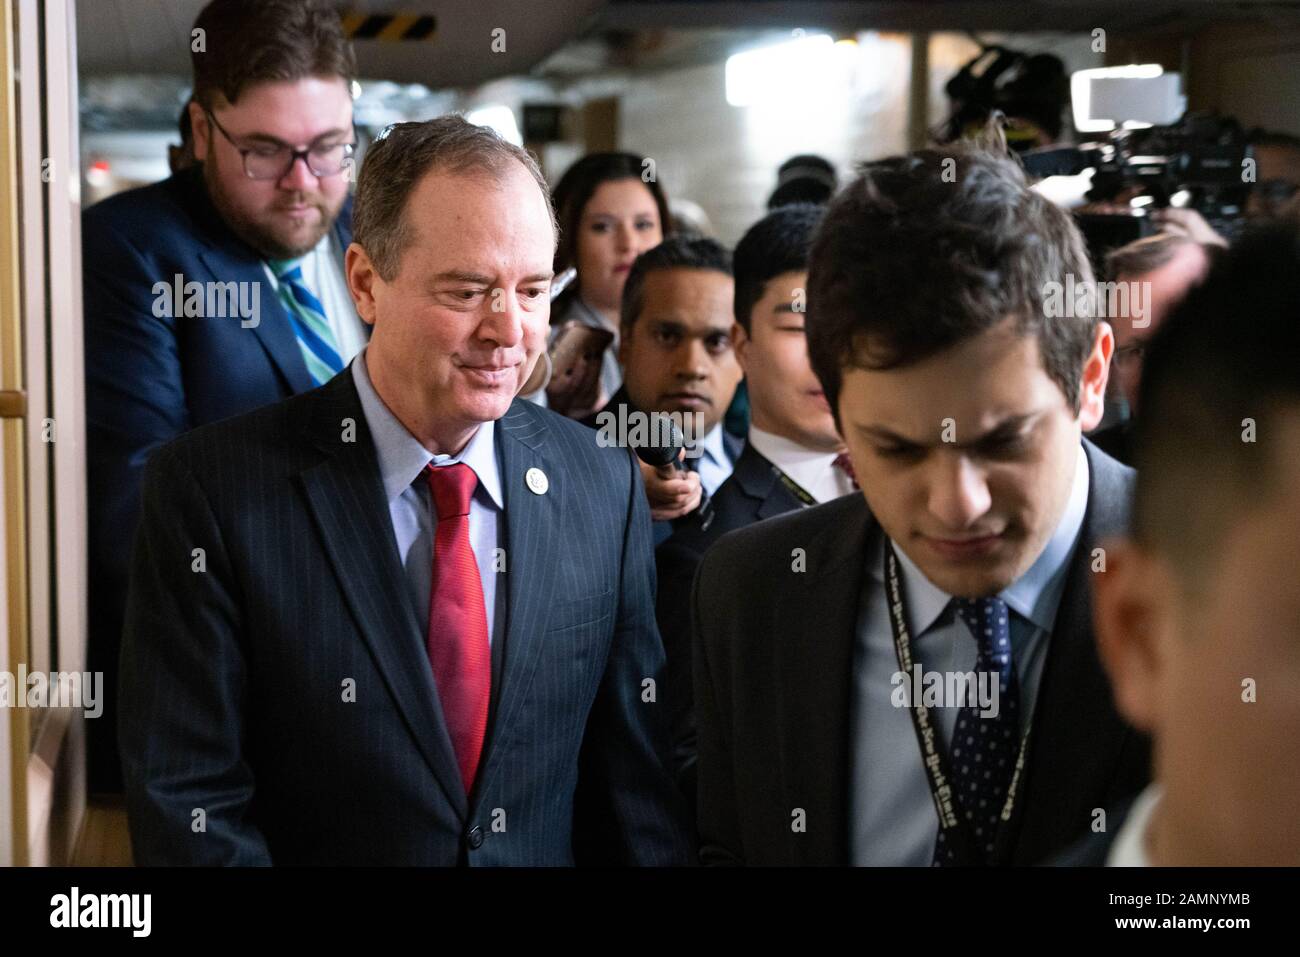 Washington, United States. 14th Jan, 2020. Committee Chairman Rep. Adam Schiff (D-CA) makes his way to a Democratic closed caucus meeting to meet with Speaker of the United States House of Representatives Nancy Pelosi (D-CA) and others on Capitol Hill in Washington, DC on Tuesday, January 14, 2020. Photo by Ken Cedeno/UPI. Credit: UPI/Alamy Live News Stock Photo